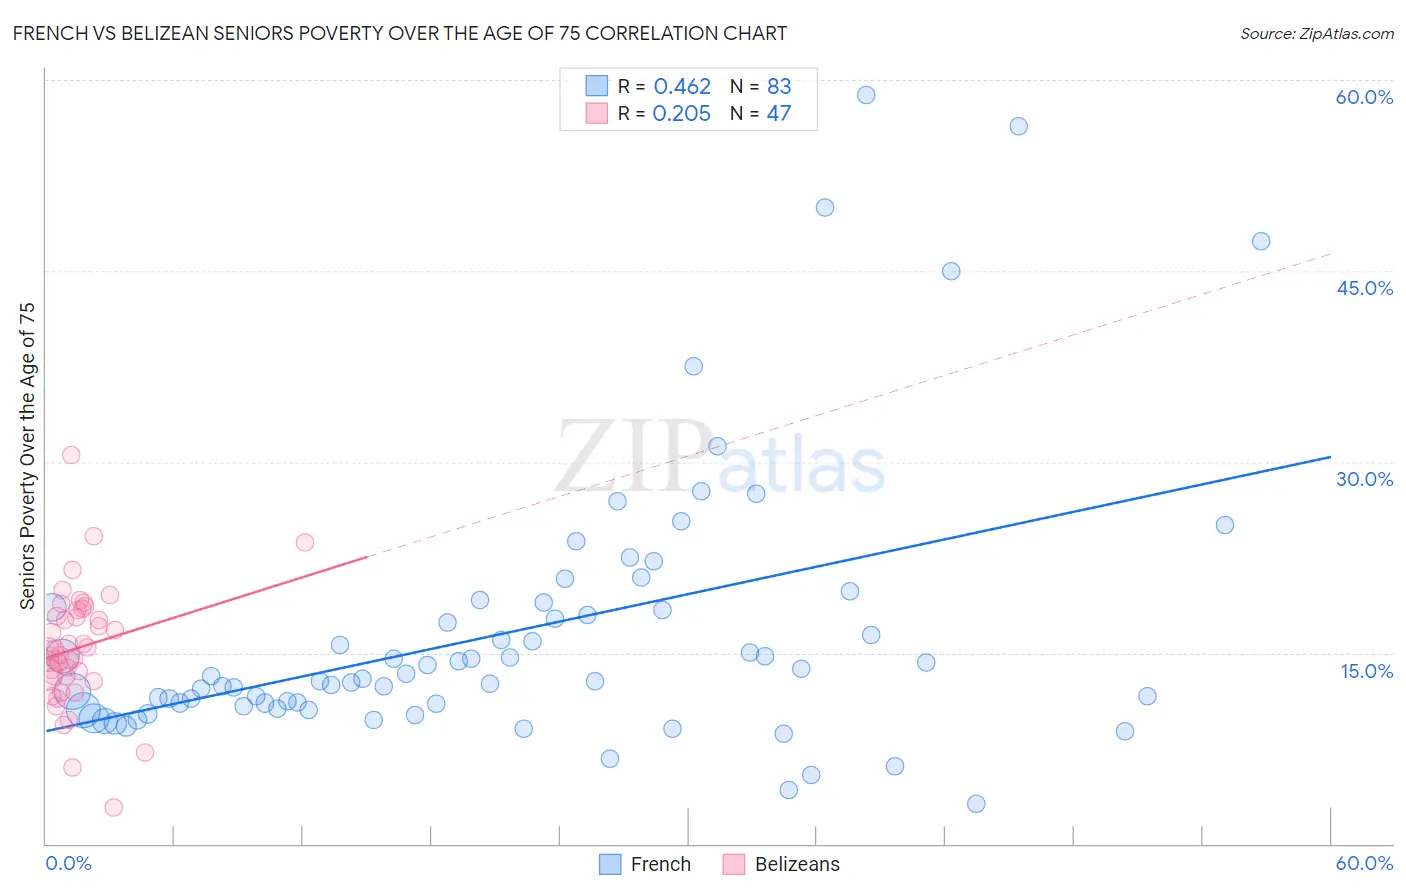 French vs Belizean Seniors Poverty Over the Age of 75